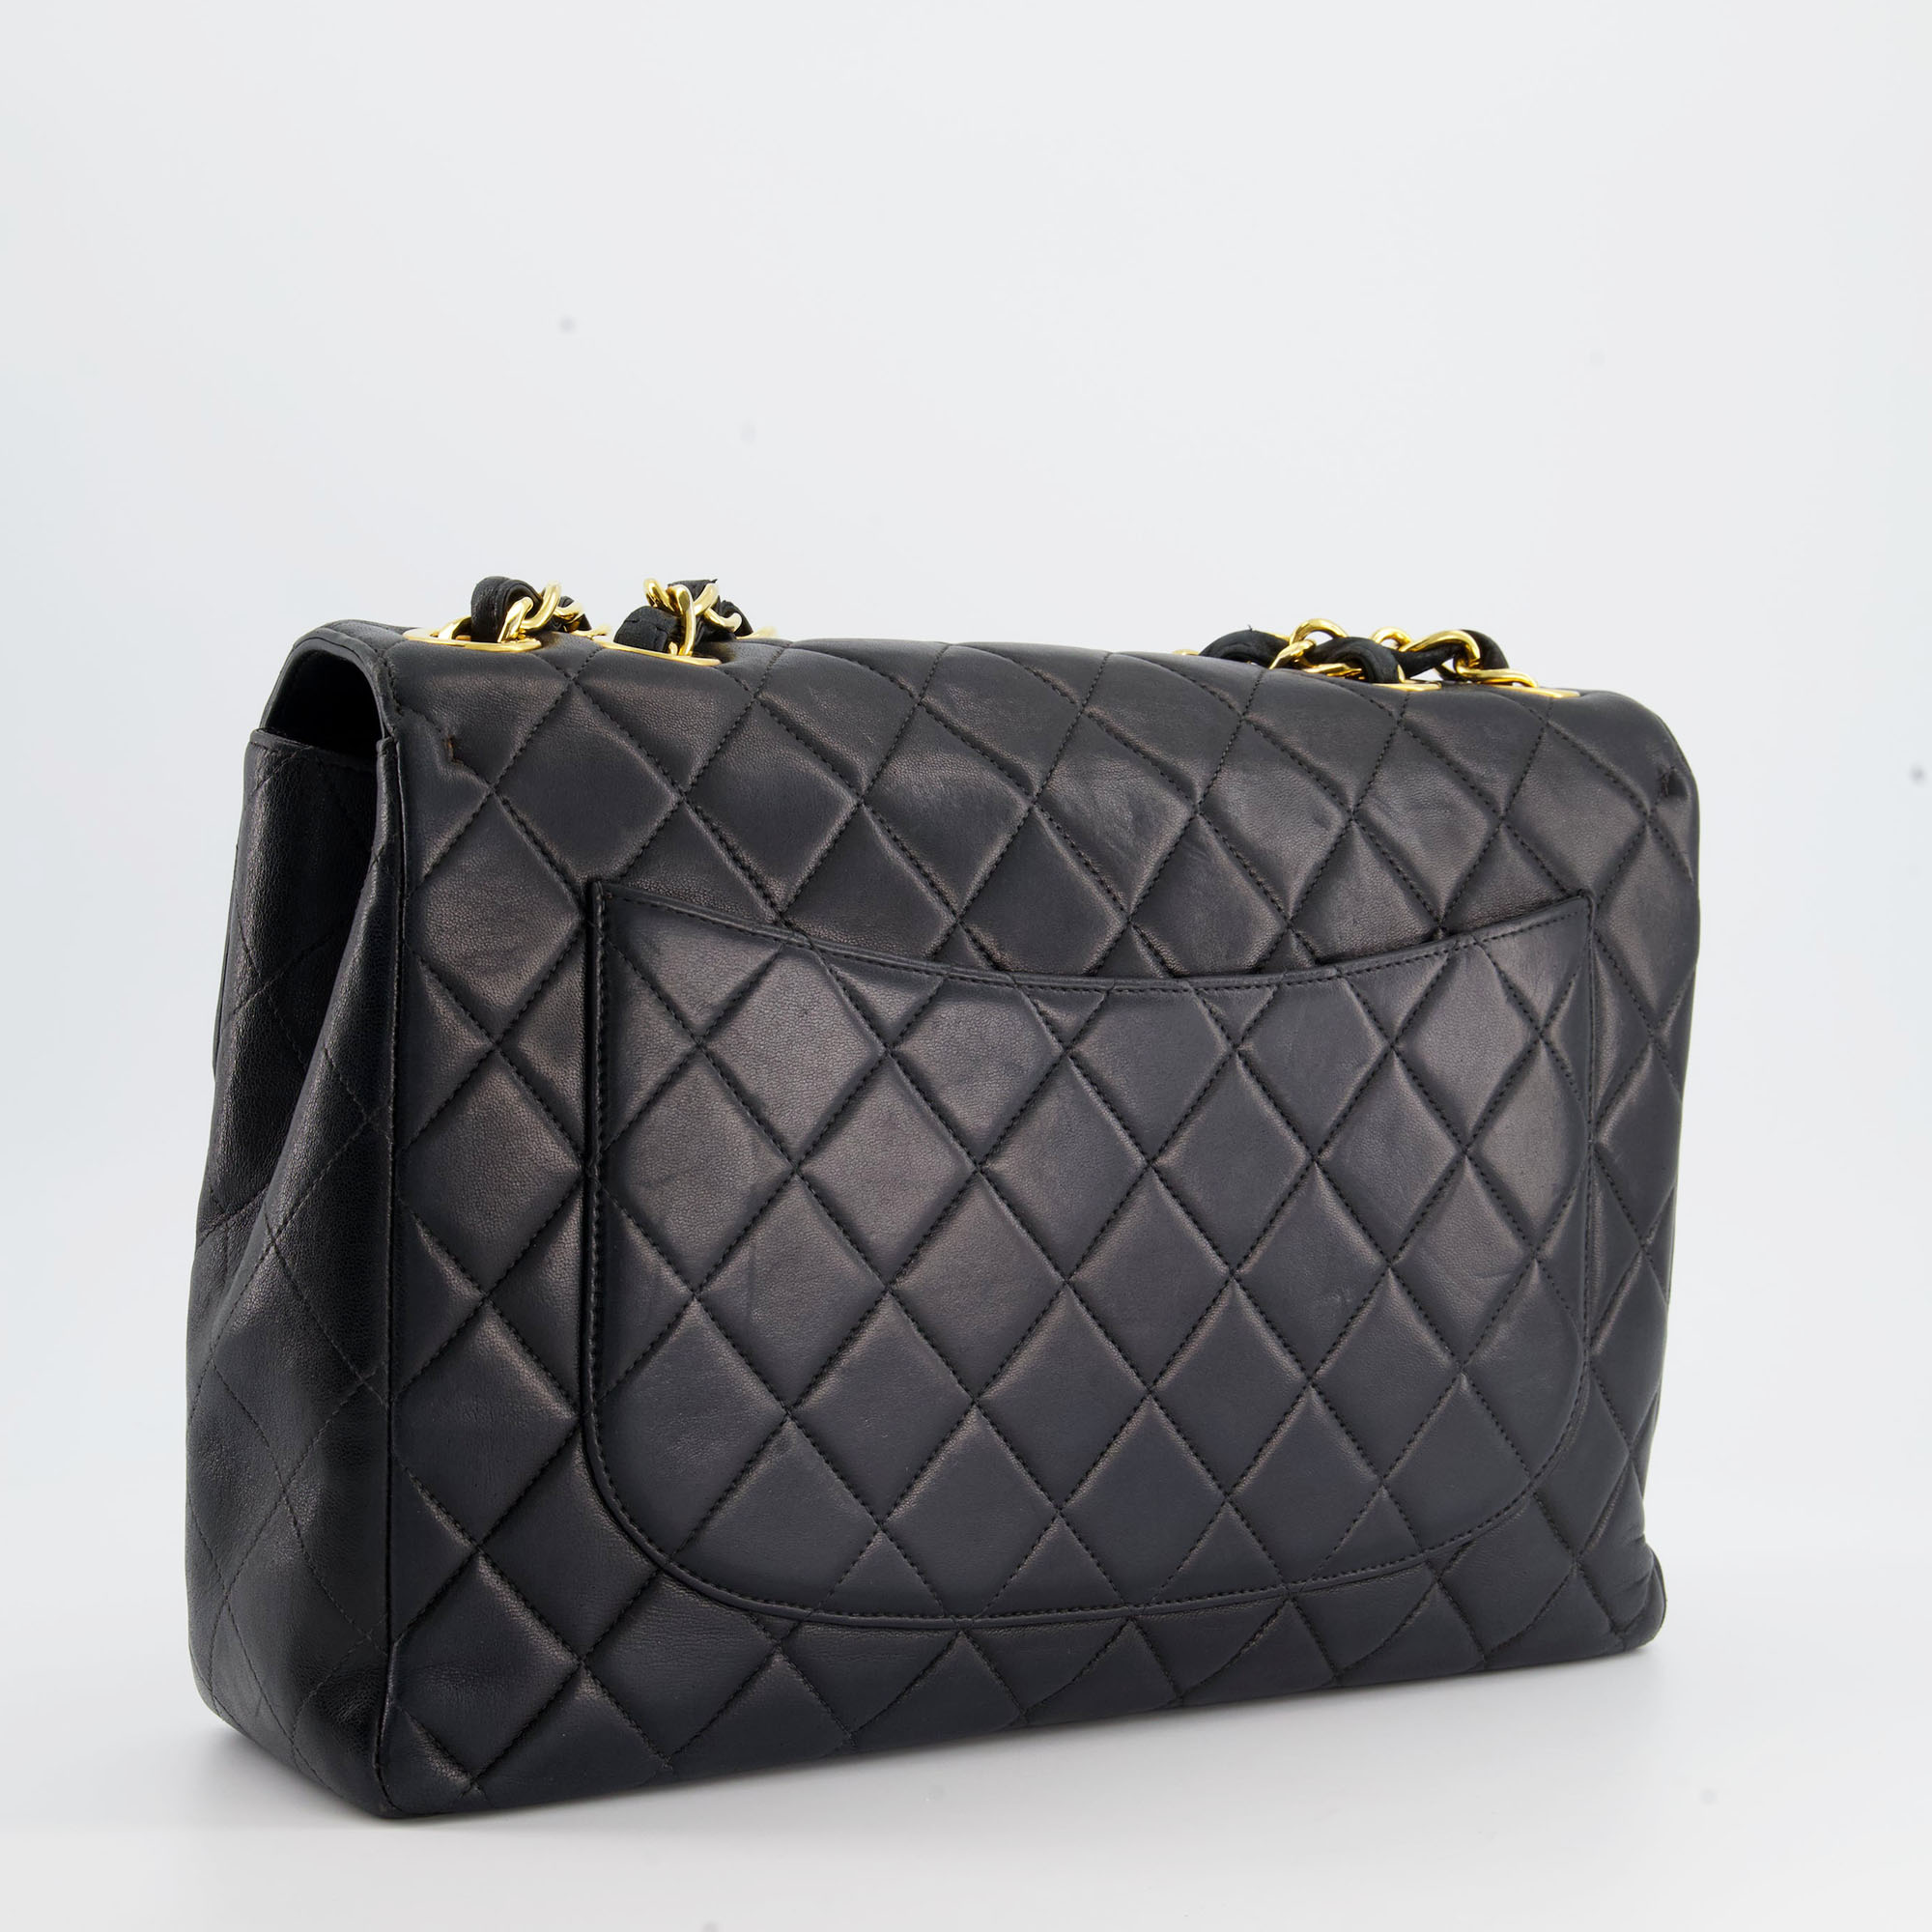 Chanel Black Vintage XL Flap Bag In Lambskin Leather With 24K Gold Hardware